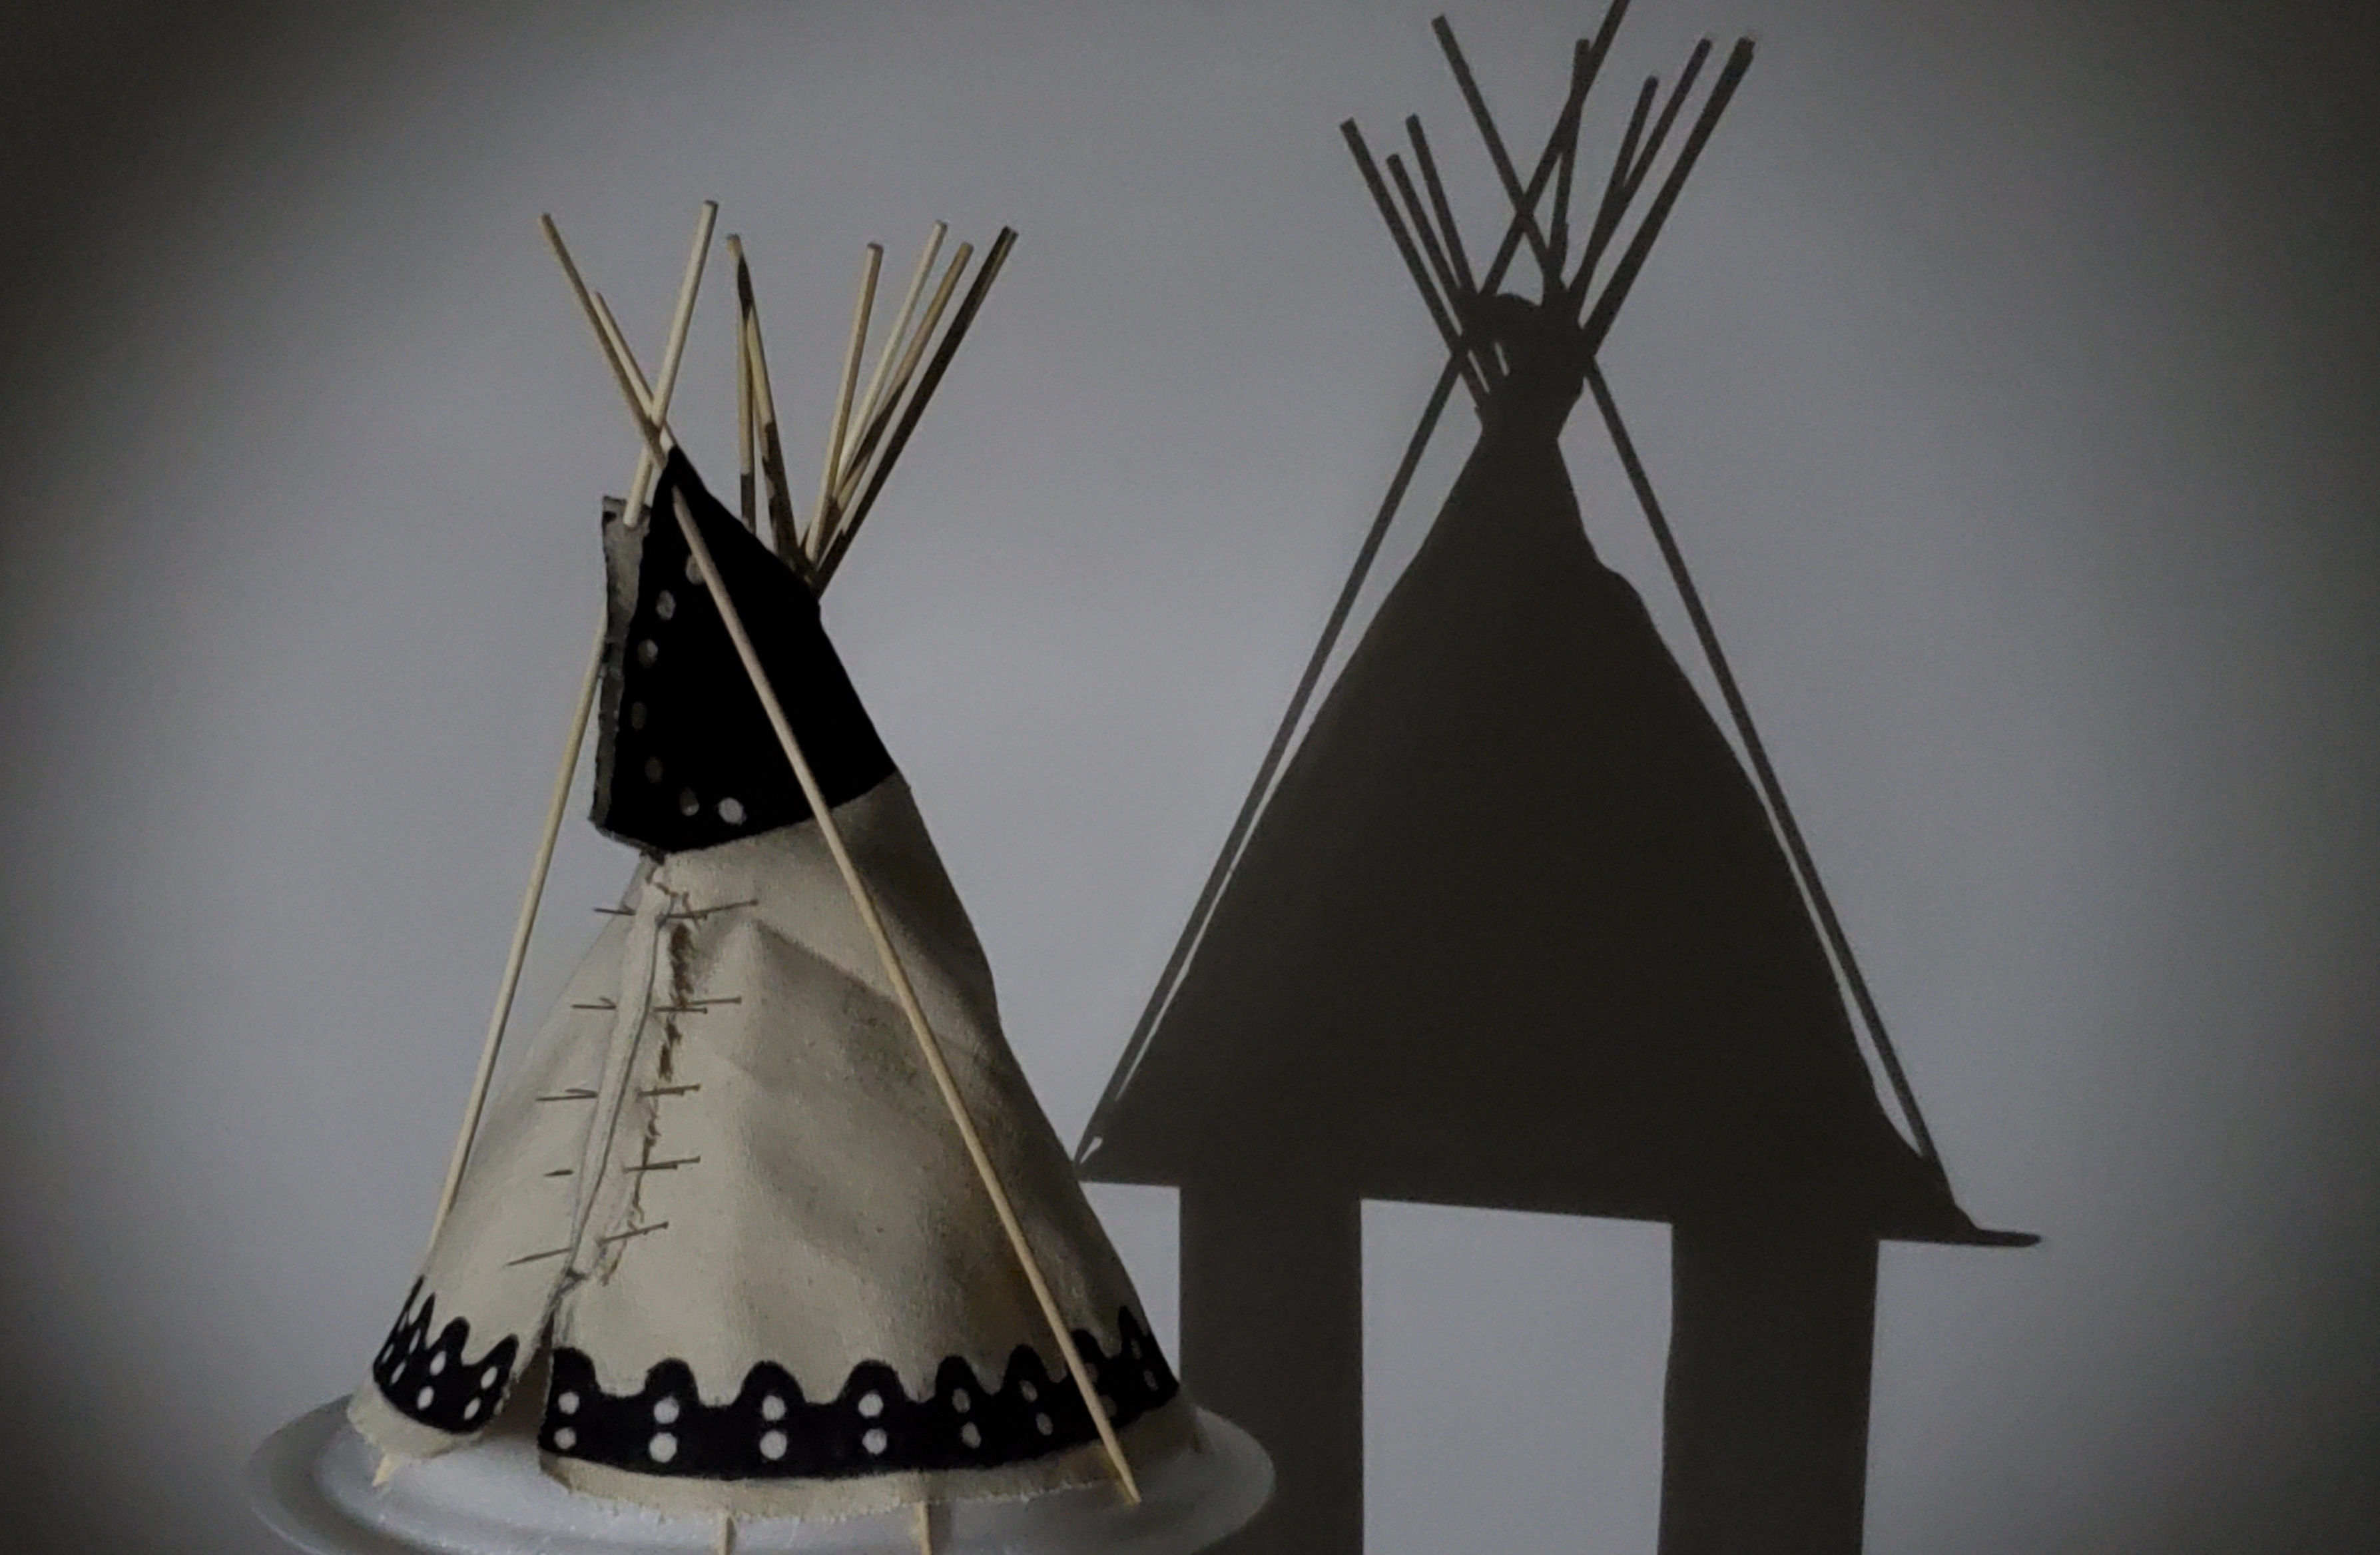 The letter 'A', made by a teepee